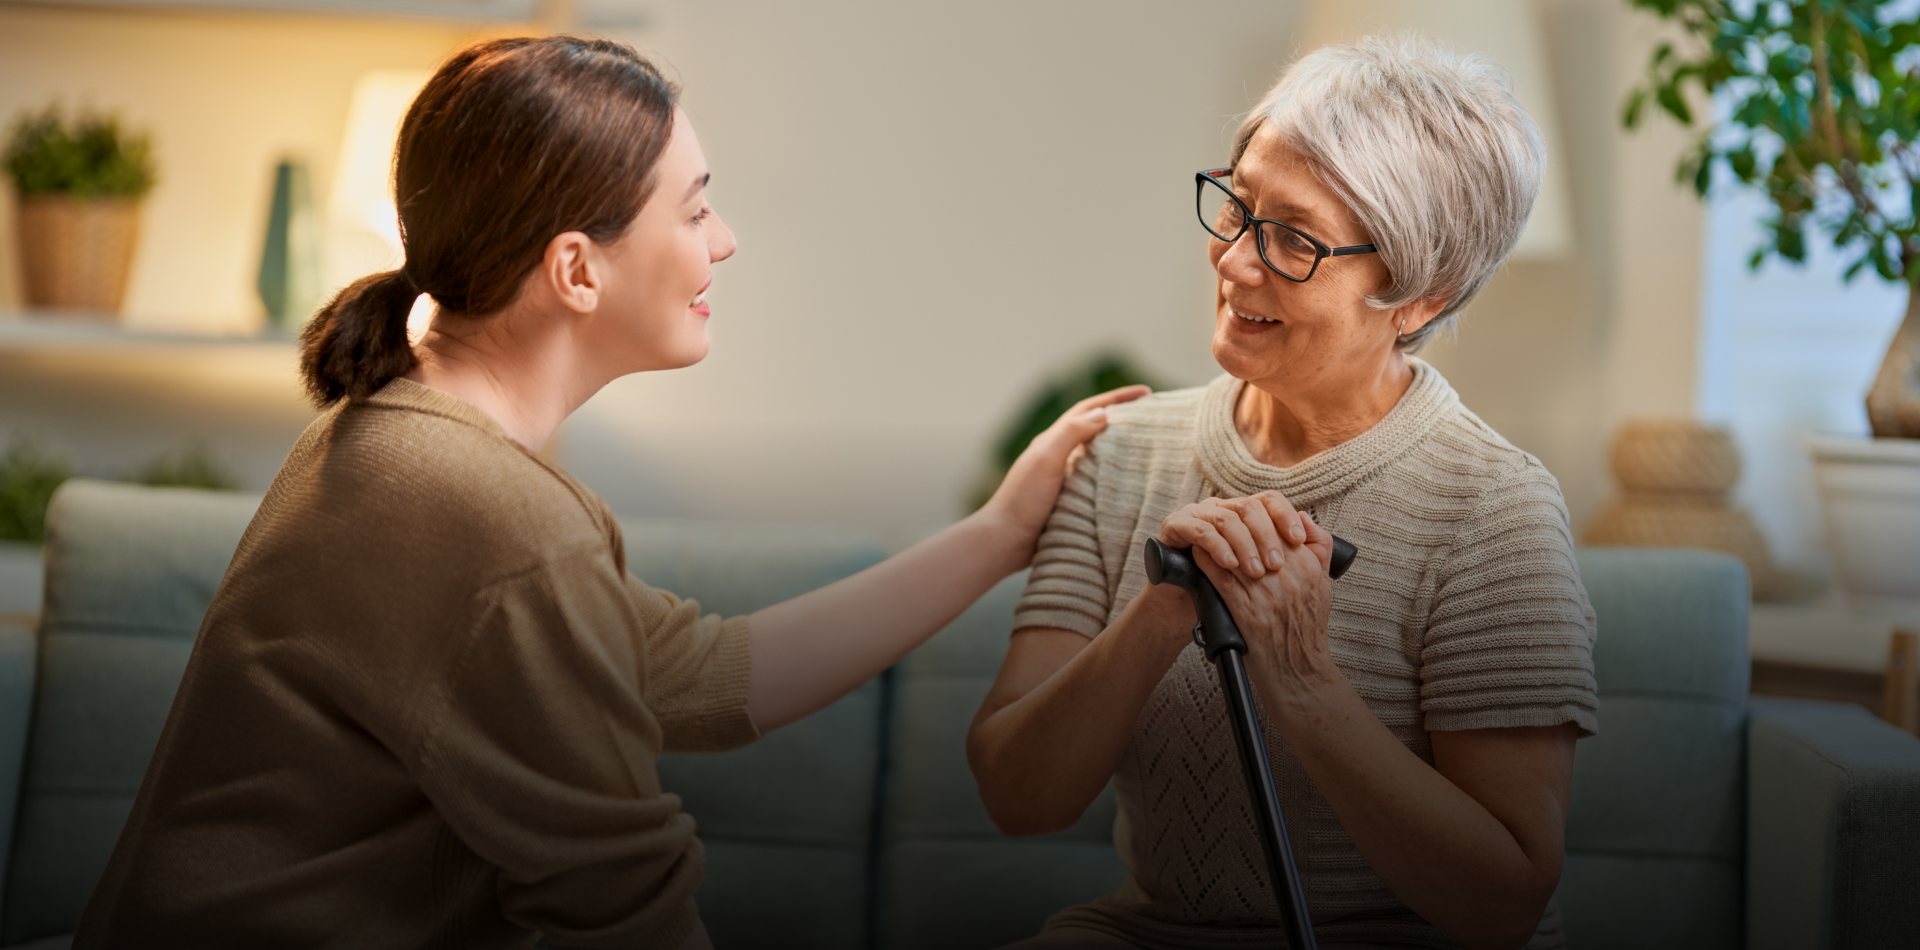 Discover exceptional Elderly Home Care Services in Greater Toronto with P.E Health Ltd